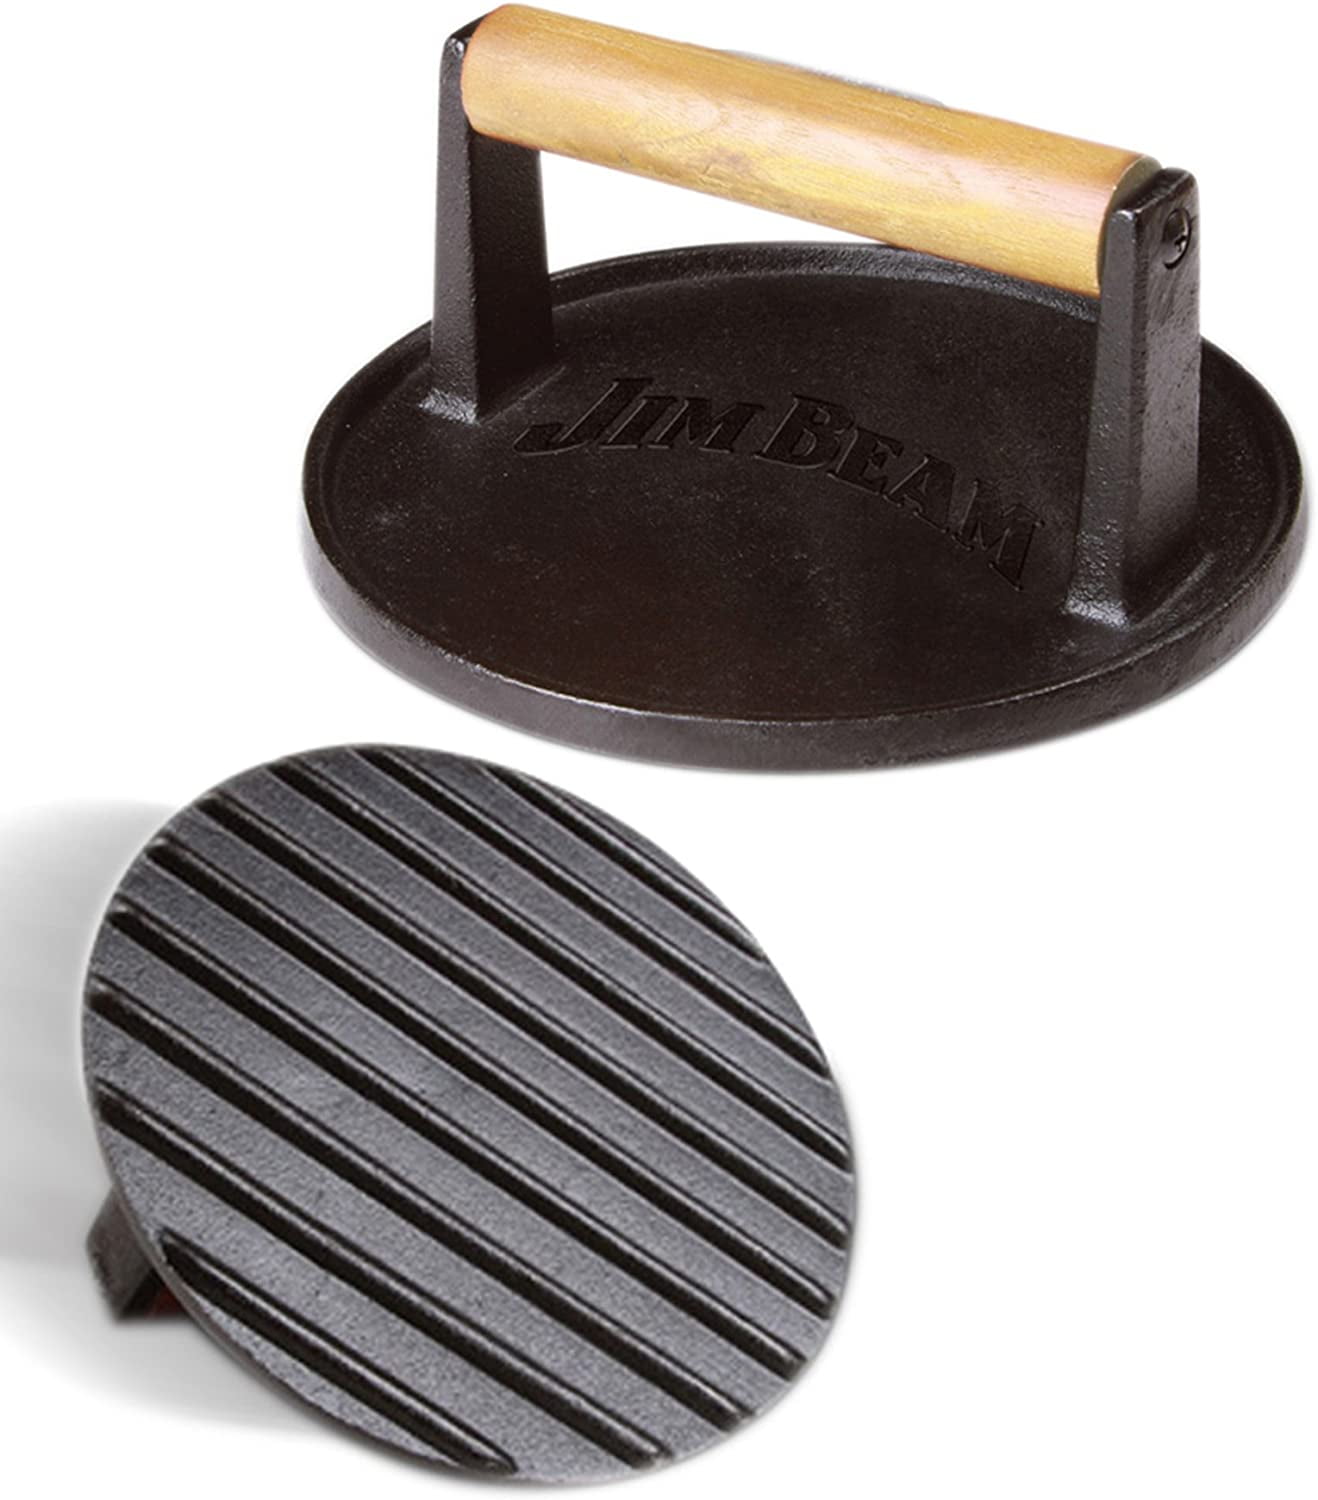 Wood Handle MEETOZ Cast Iron Grill Press ,Burger Grill Press,7.1-Inch by 7.1-Inch Round Black Bacon